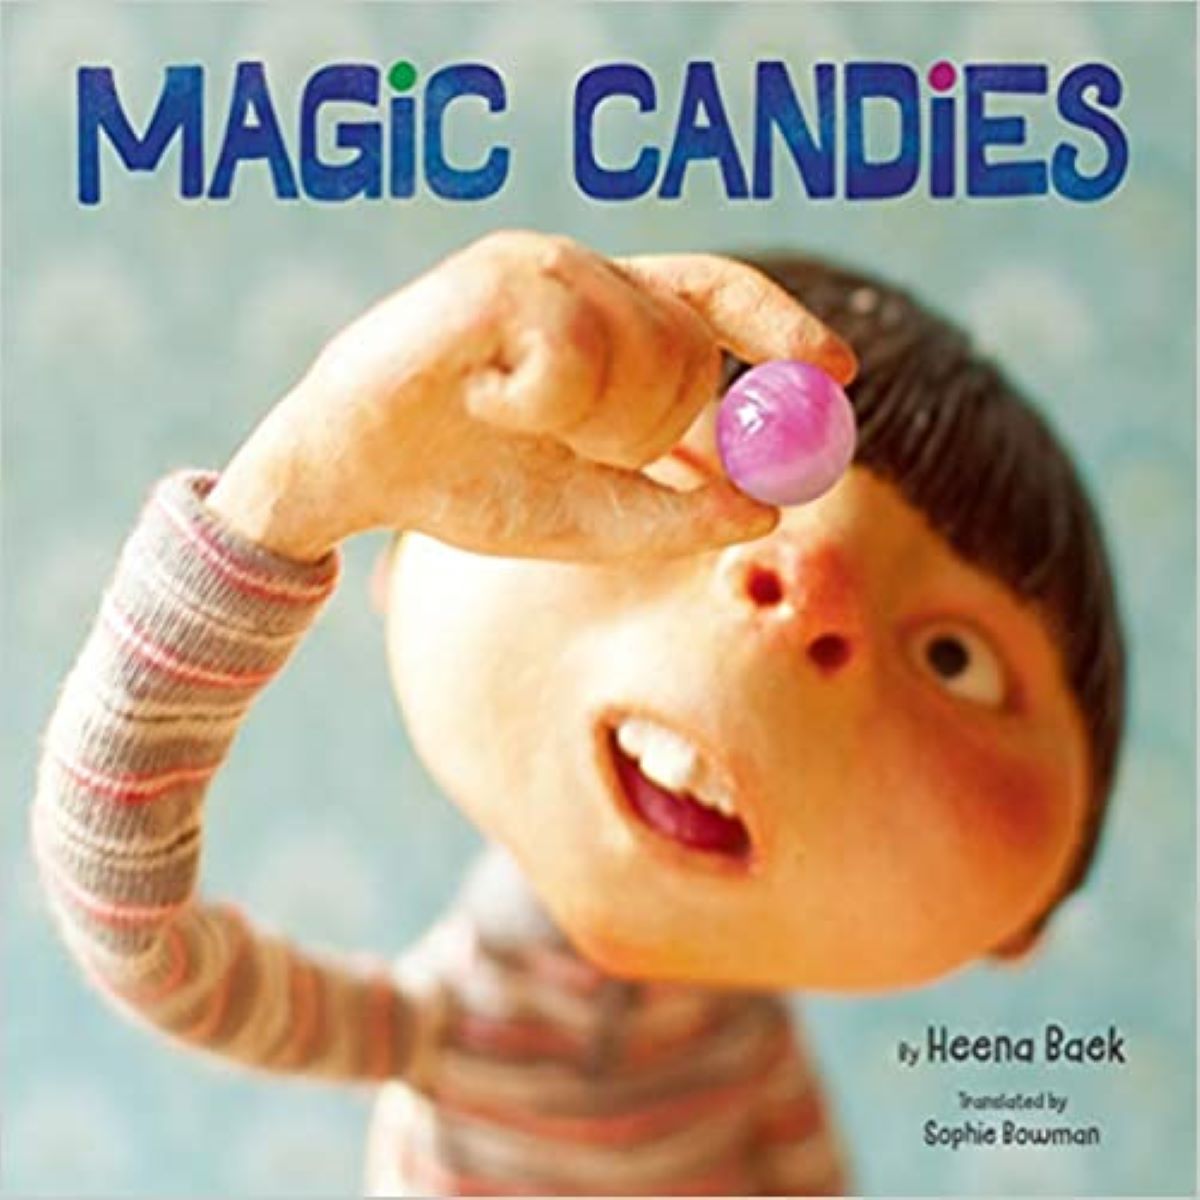 Book Cover of "Magic Candies" by Heena Baek; includes a boy with brown hair cut into a blunt bowl cut and wearing a long sleeved striped shirt. He is holding up a pink gumball to his eye and looking at it. 